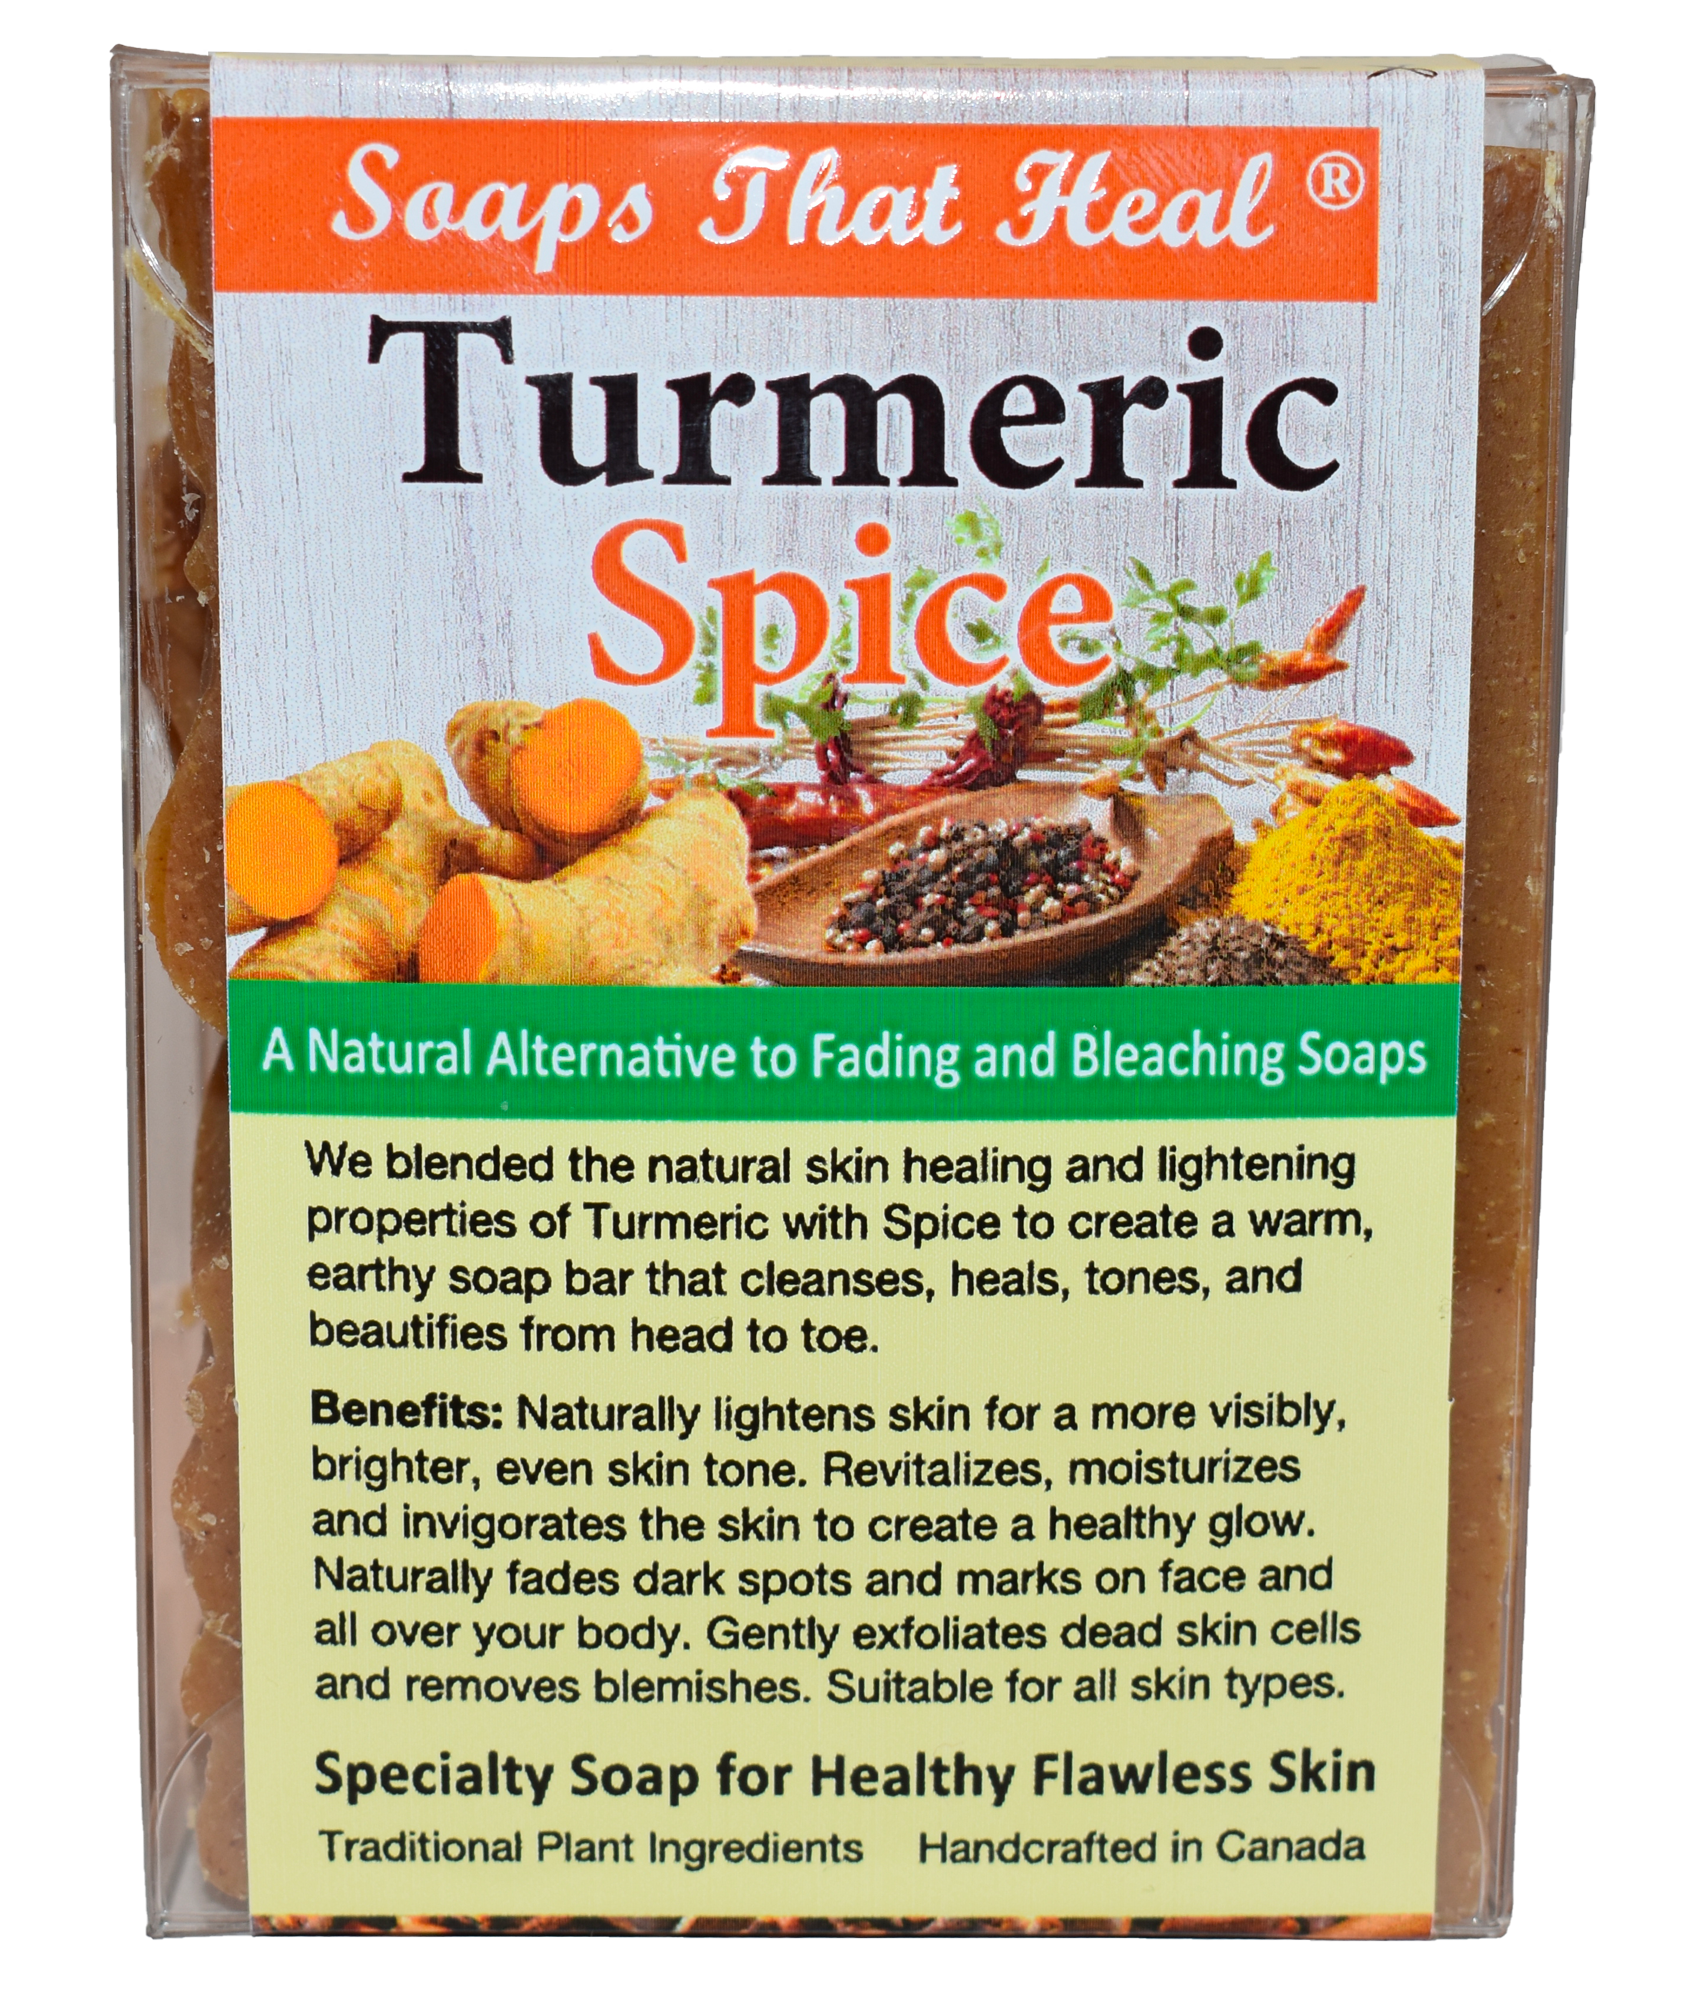 Soaps That Heal  Turmeric Spice Natural Lightening Bar for Severe Facial Hyperpigmentation and Problem Skin  A natural remedy for facial hyperpigmentation. Enriched with turmeric and spices, it works to diminish dark spots, revealing a more radiant and evenly-toned complexion,Facial Acanthosis Nigricans,asymptomatic, velvety hyperpigmentation